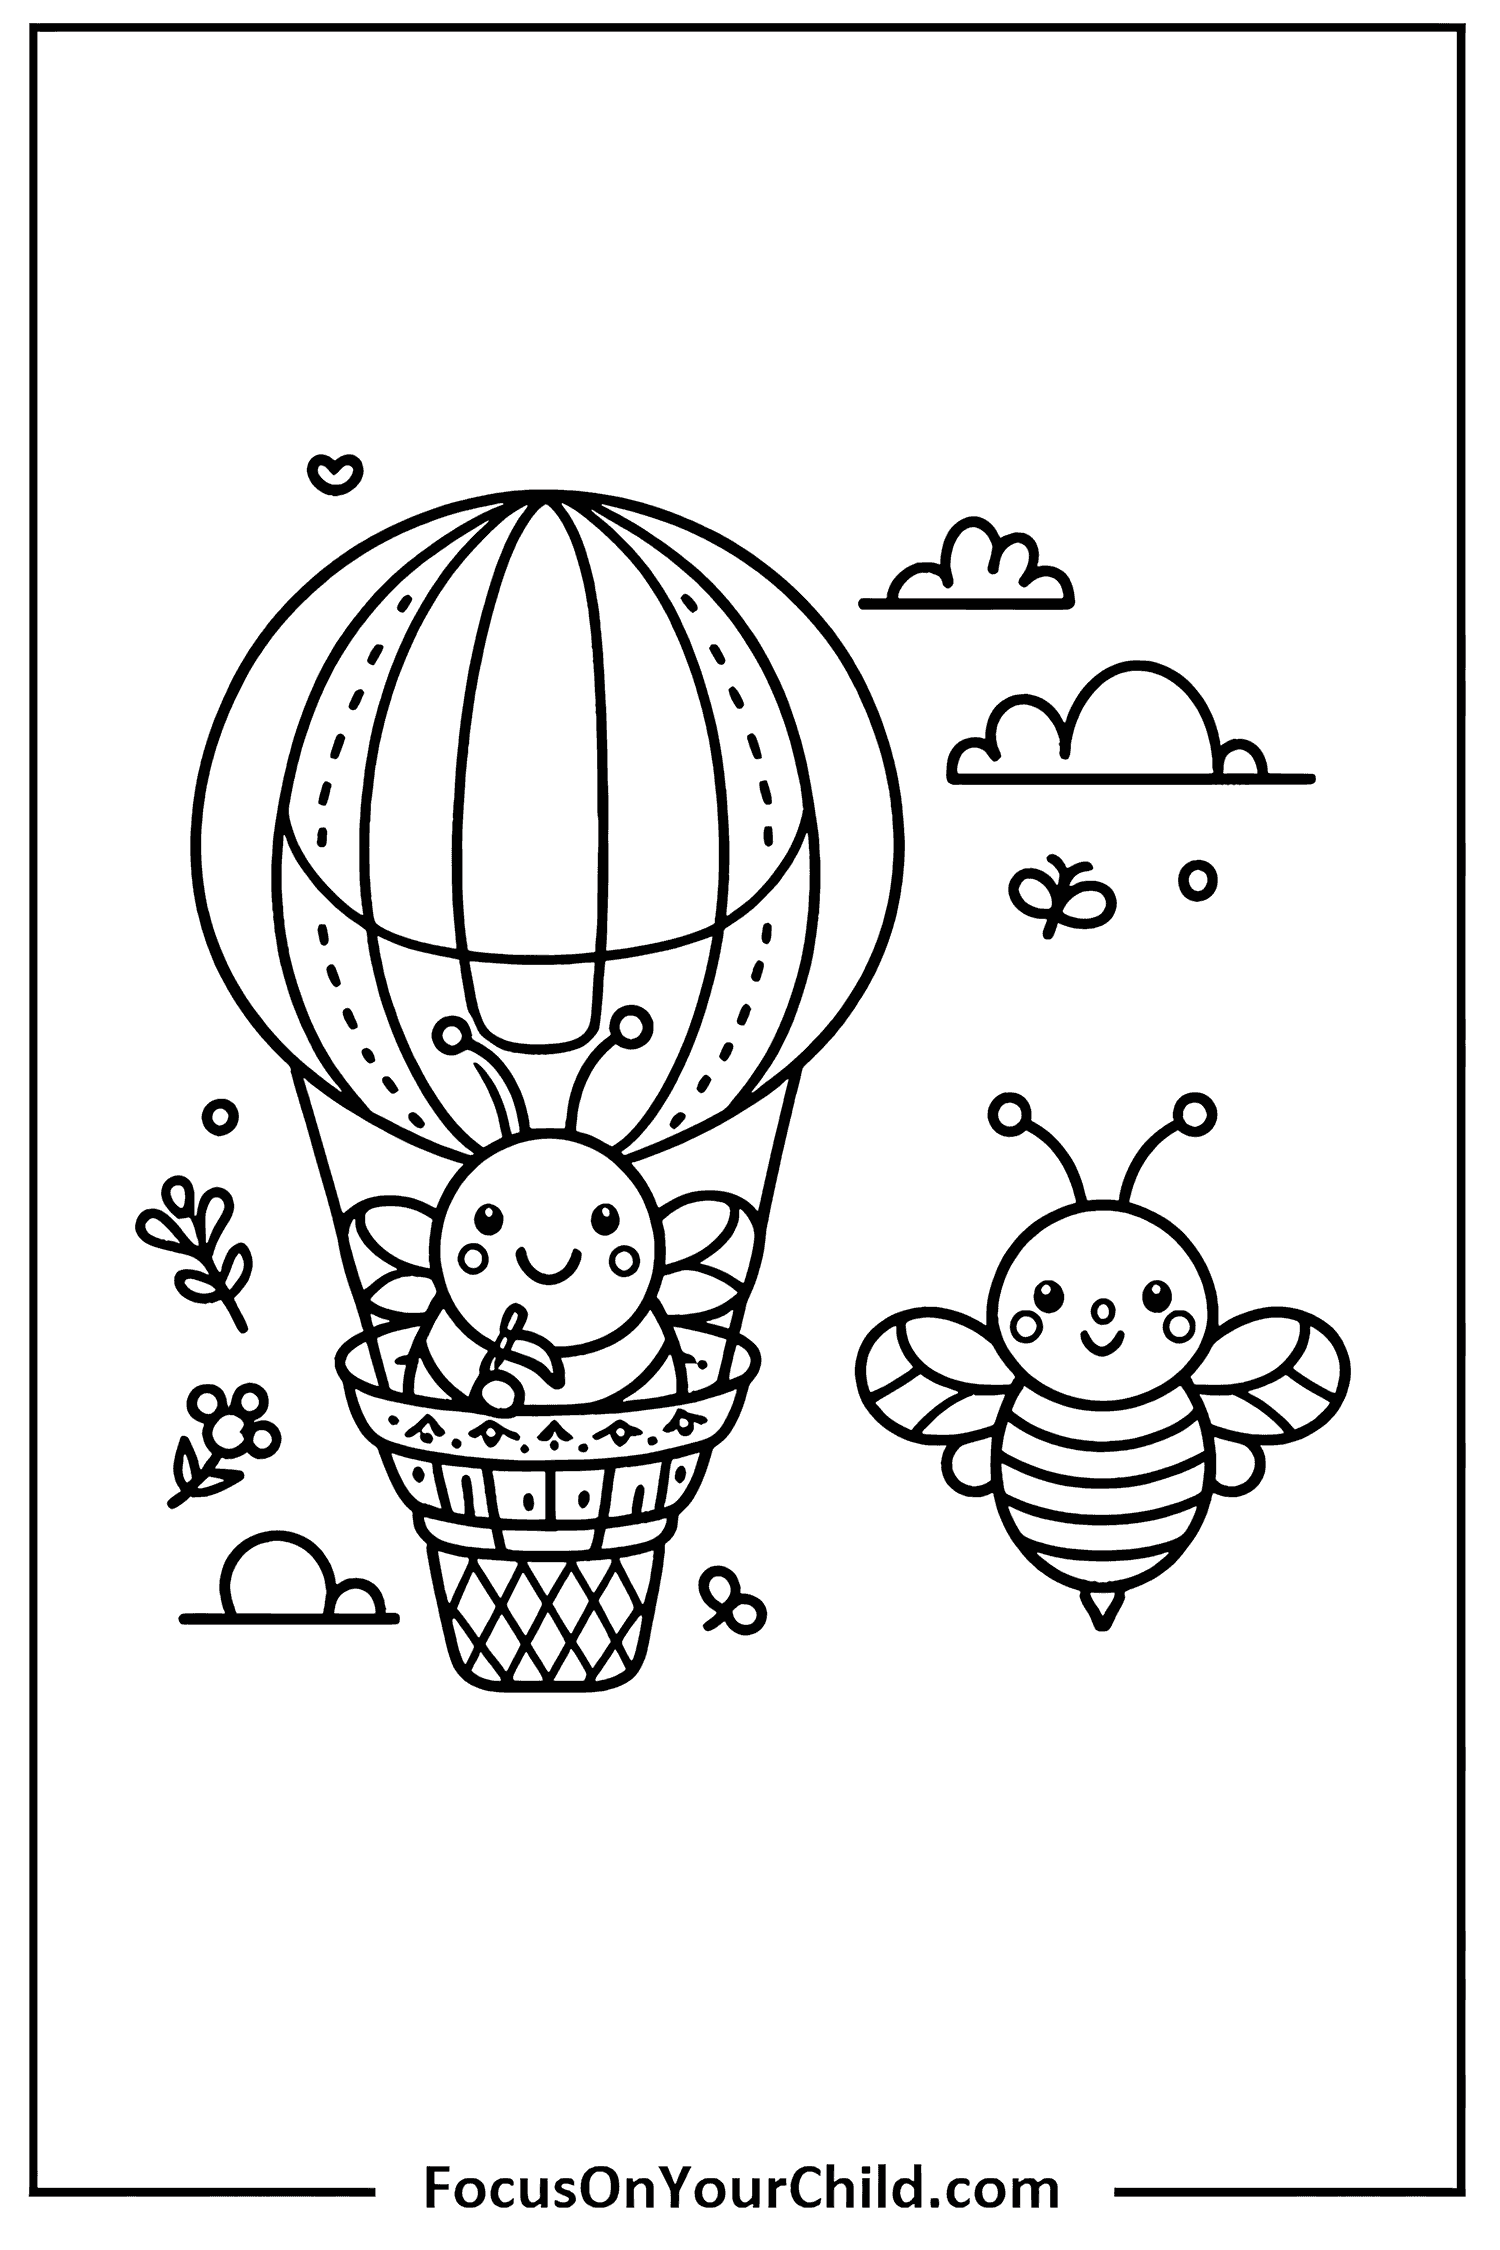 Two bees enjoying a whimsical hot air balloon ride in a child-friendly scene.